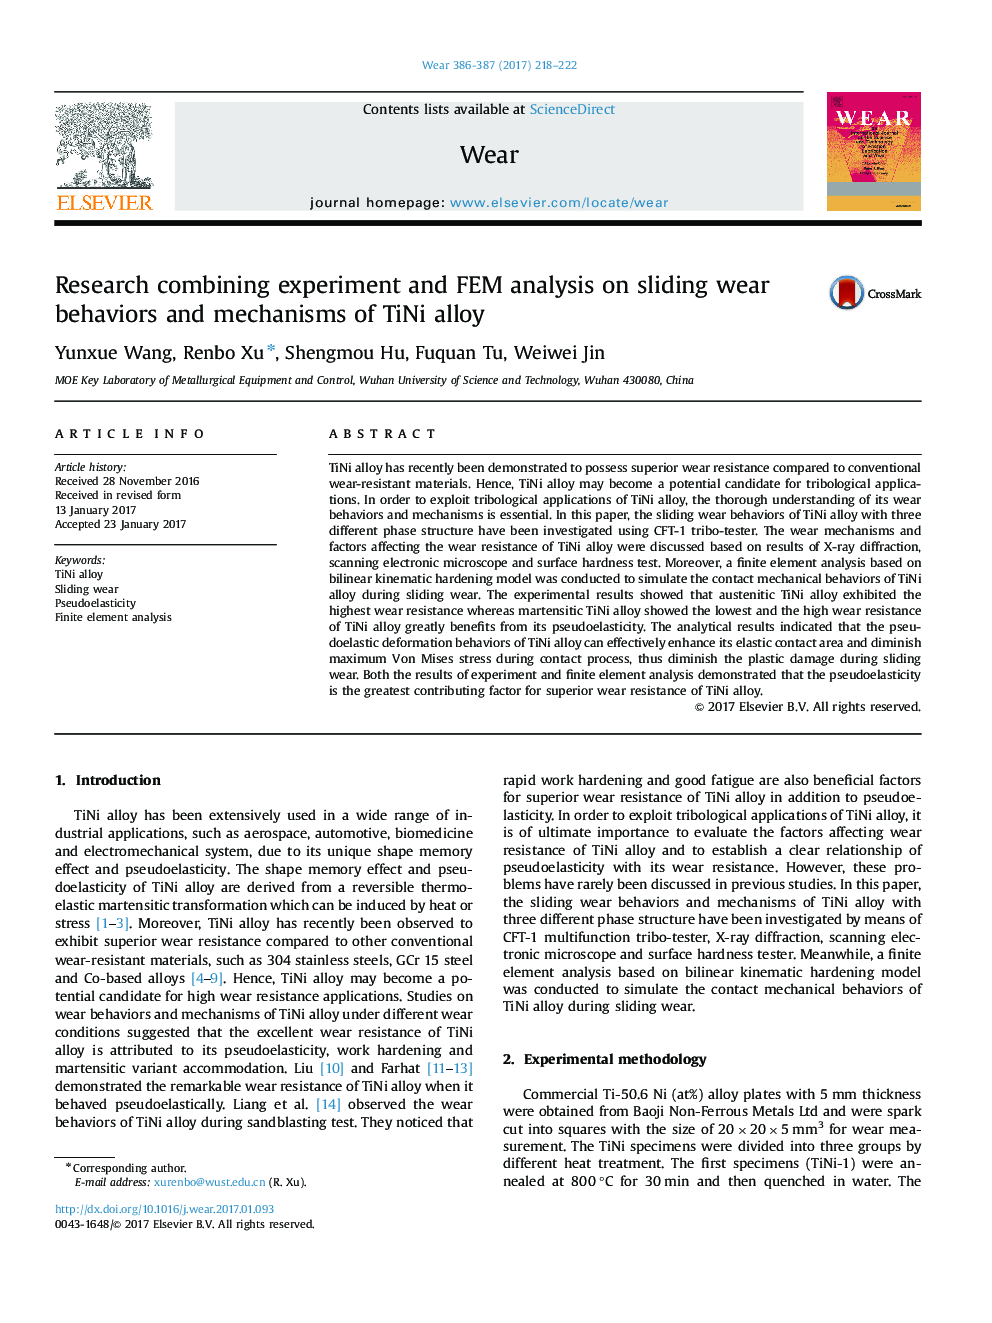 Research combining experiment and FEM analysis on sliding wear behaviors and mechanisms of TiNi alloy